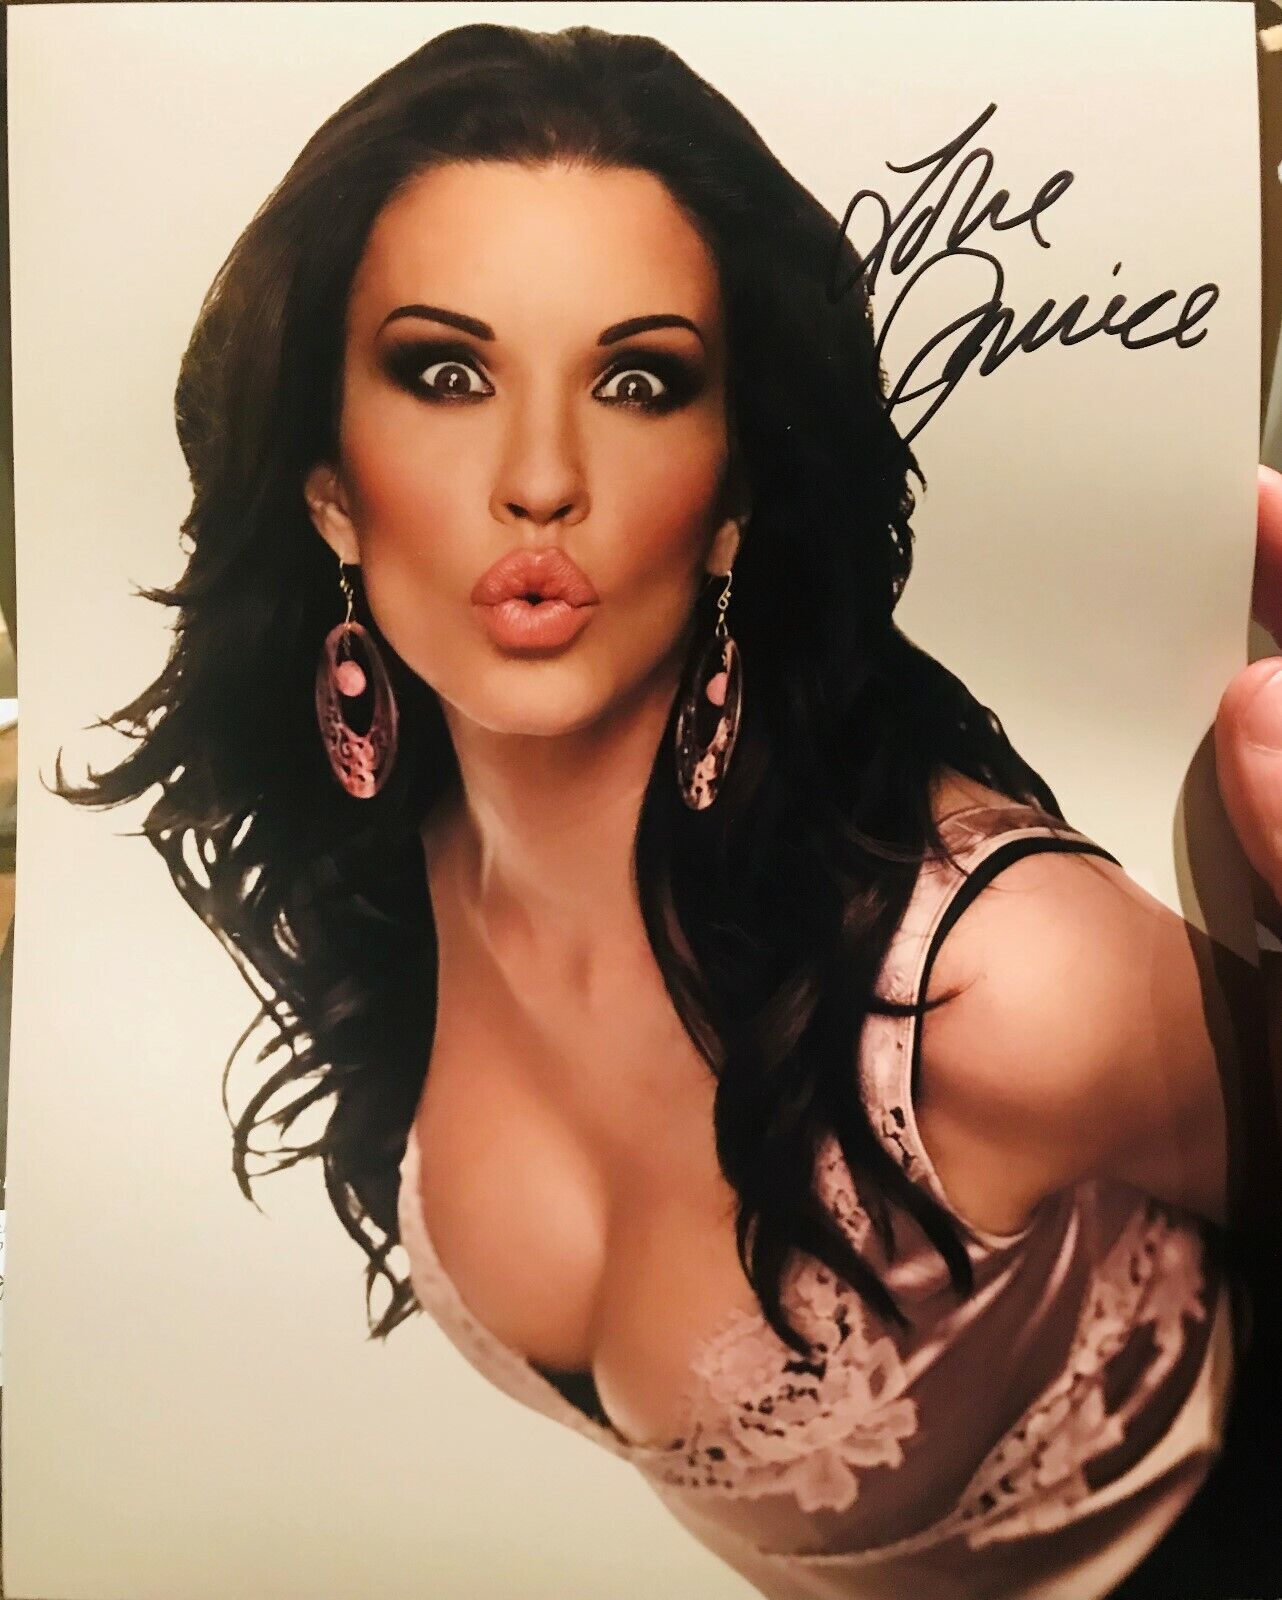 Janice Dickinson super model autographed Photo Poster painting signed 8X10 #10 sexy